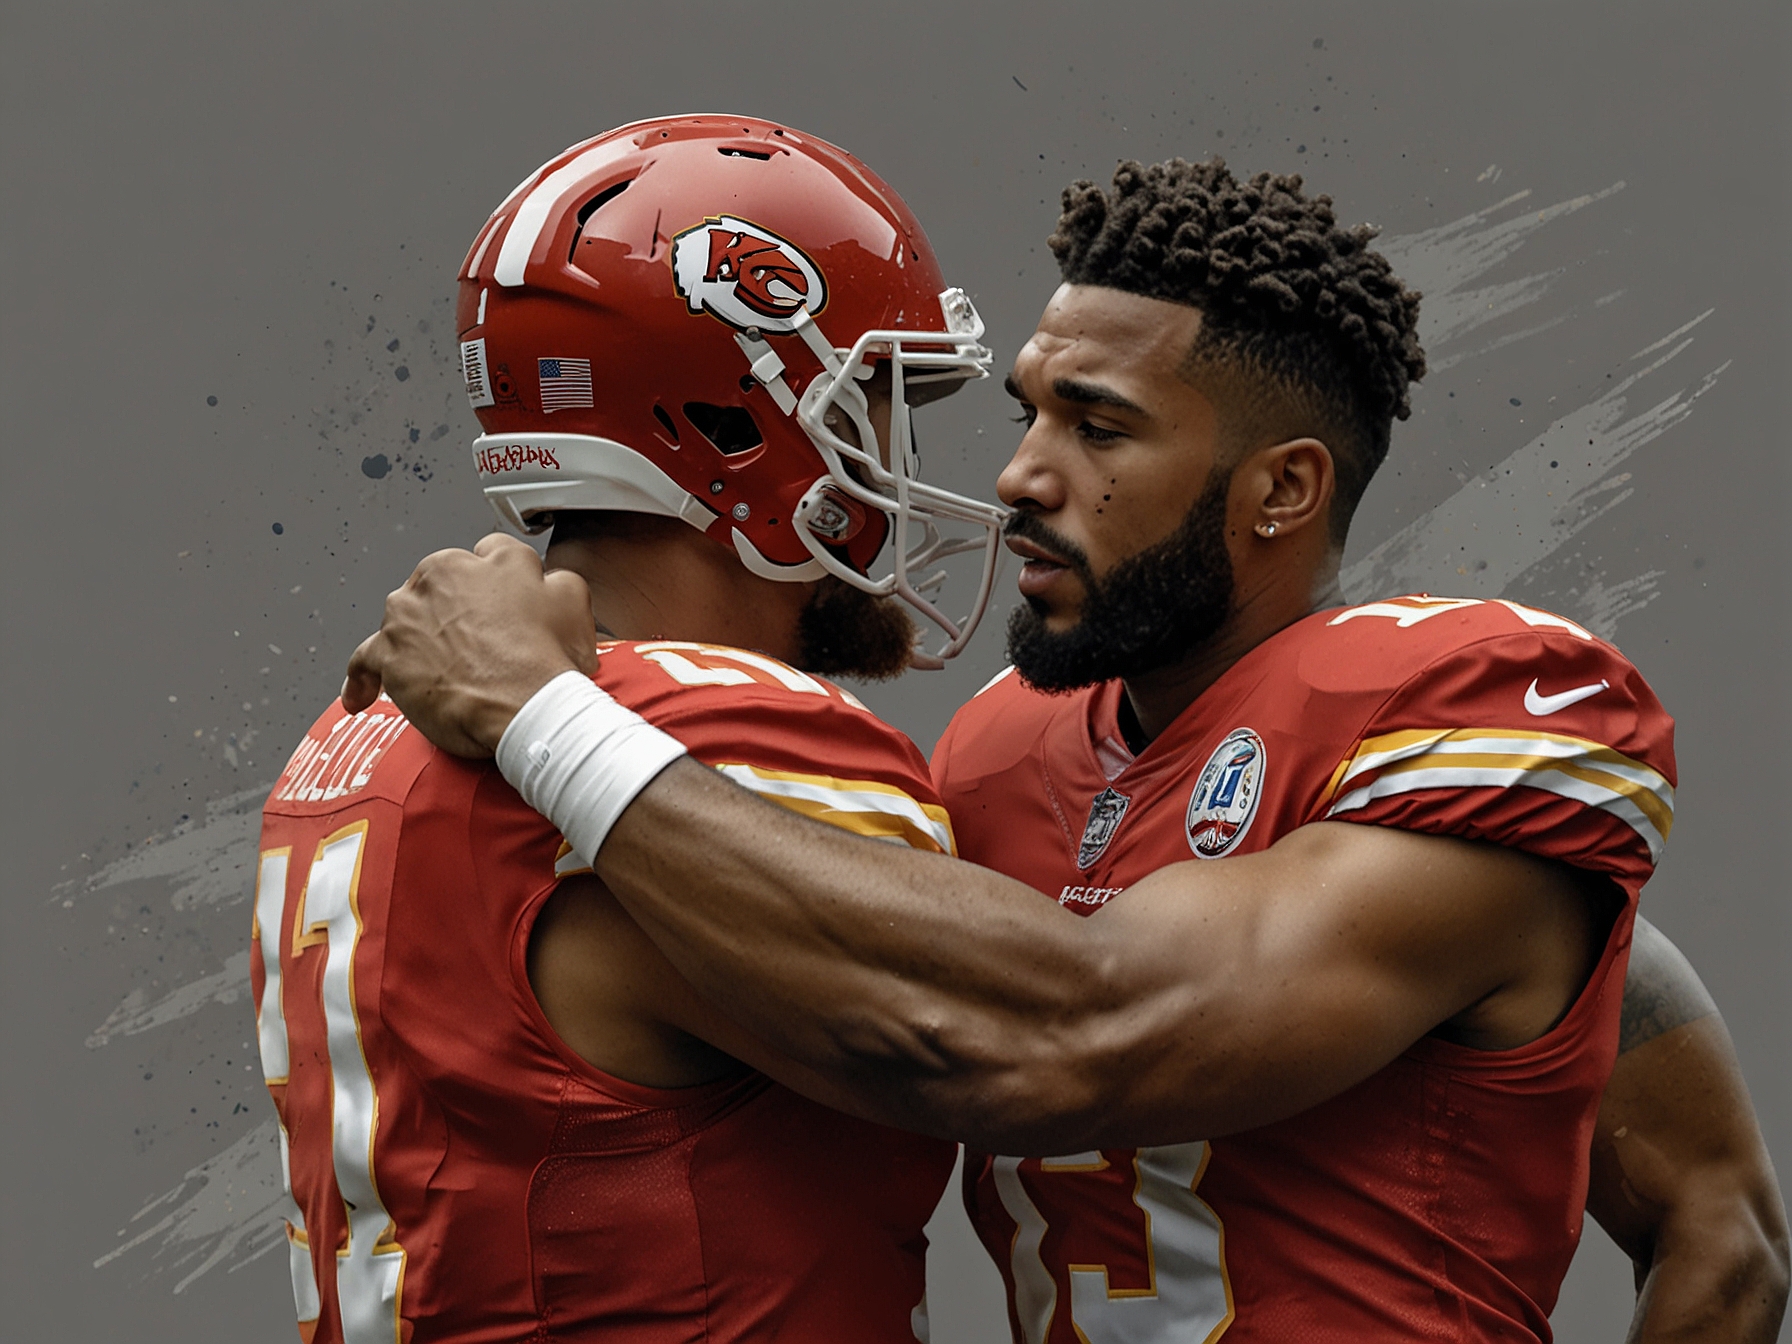 A heartwarming moment of camaraderie between Travis Kelce and Justin Jefferson, emphasizing respect and mutual admiration despite the earnings disparity.